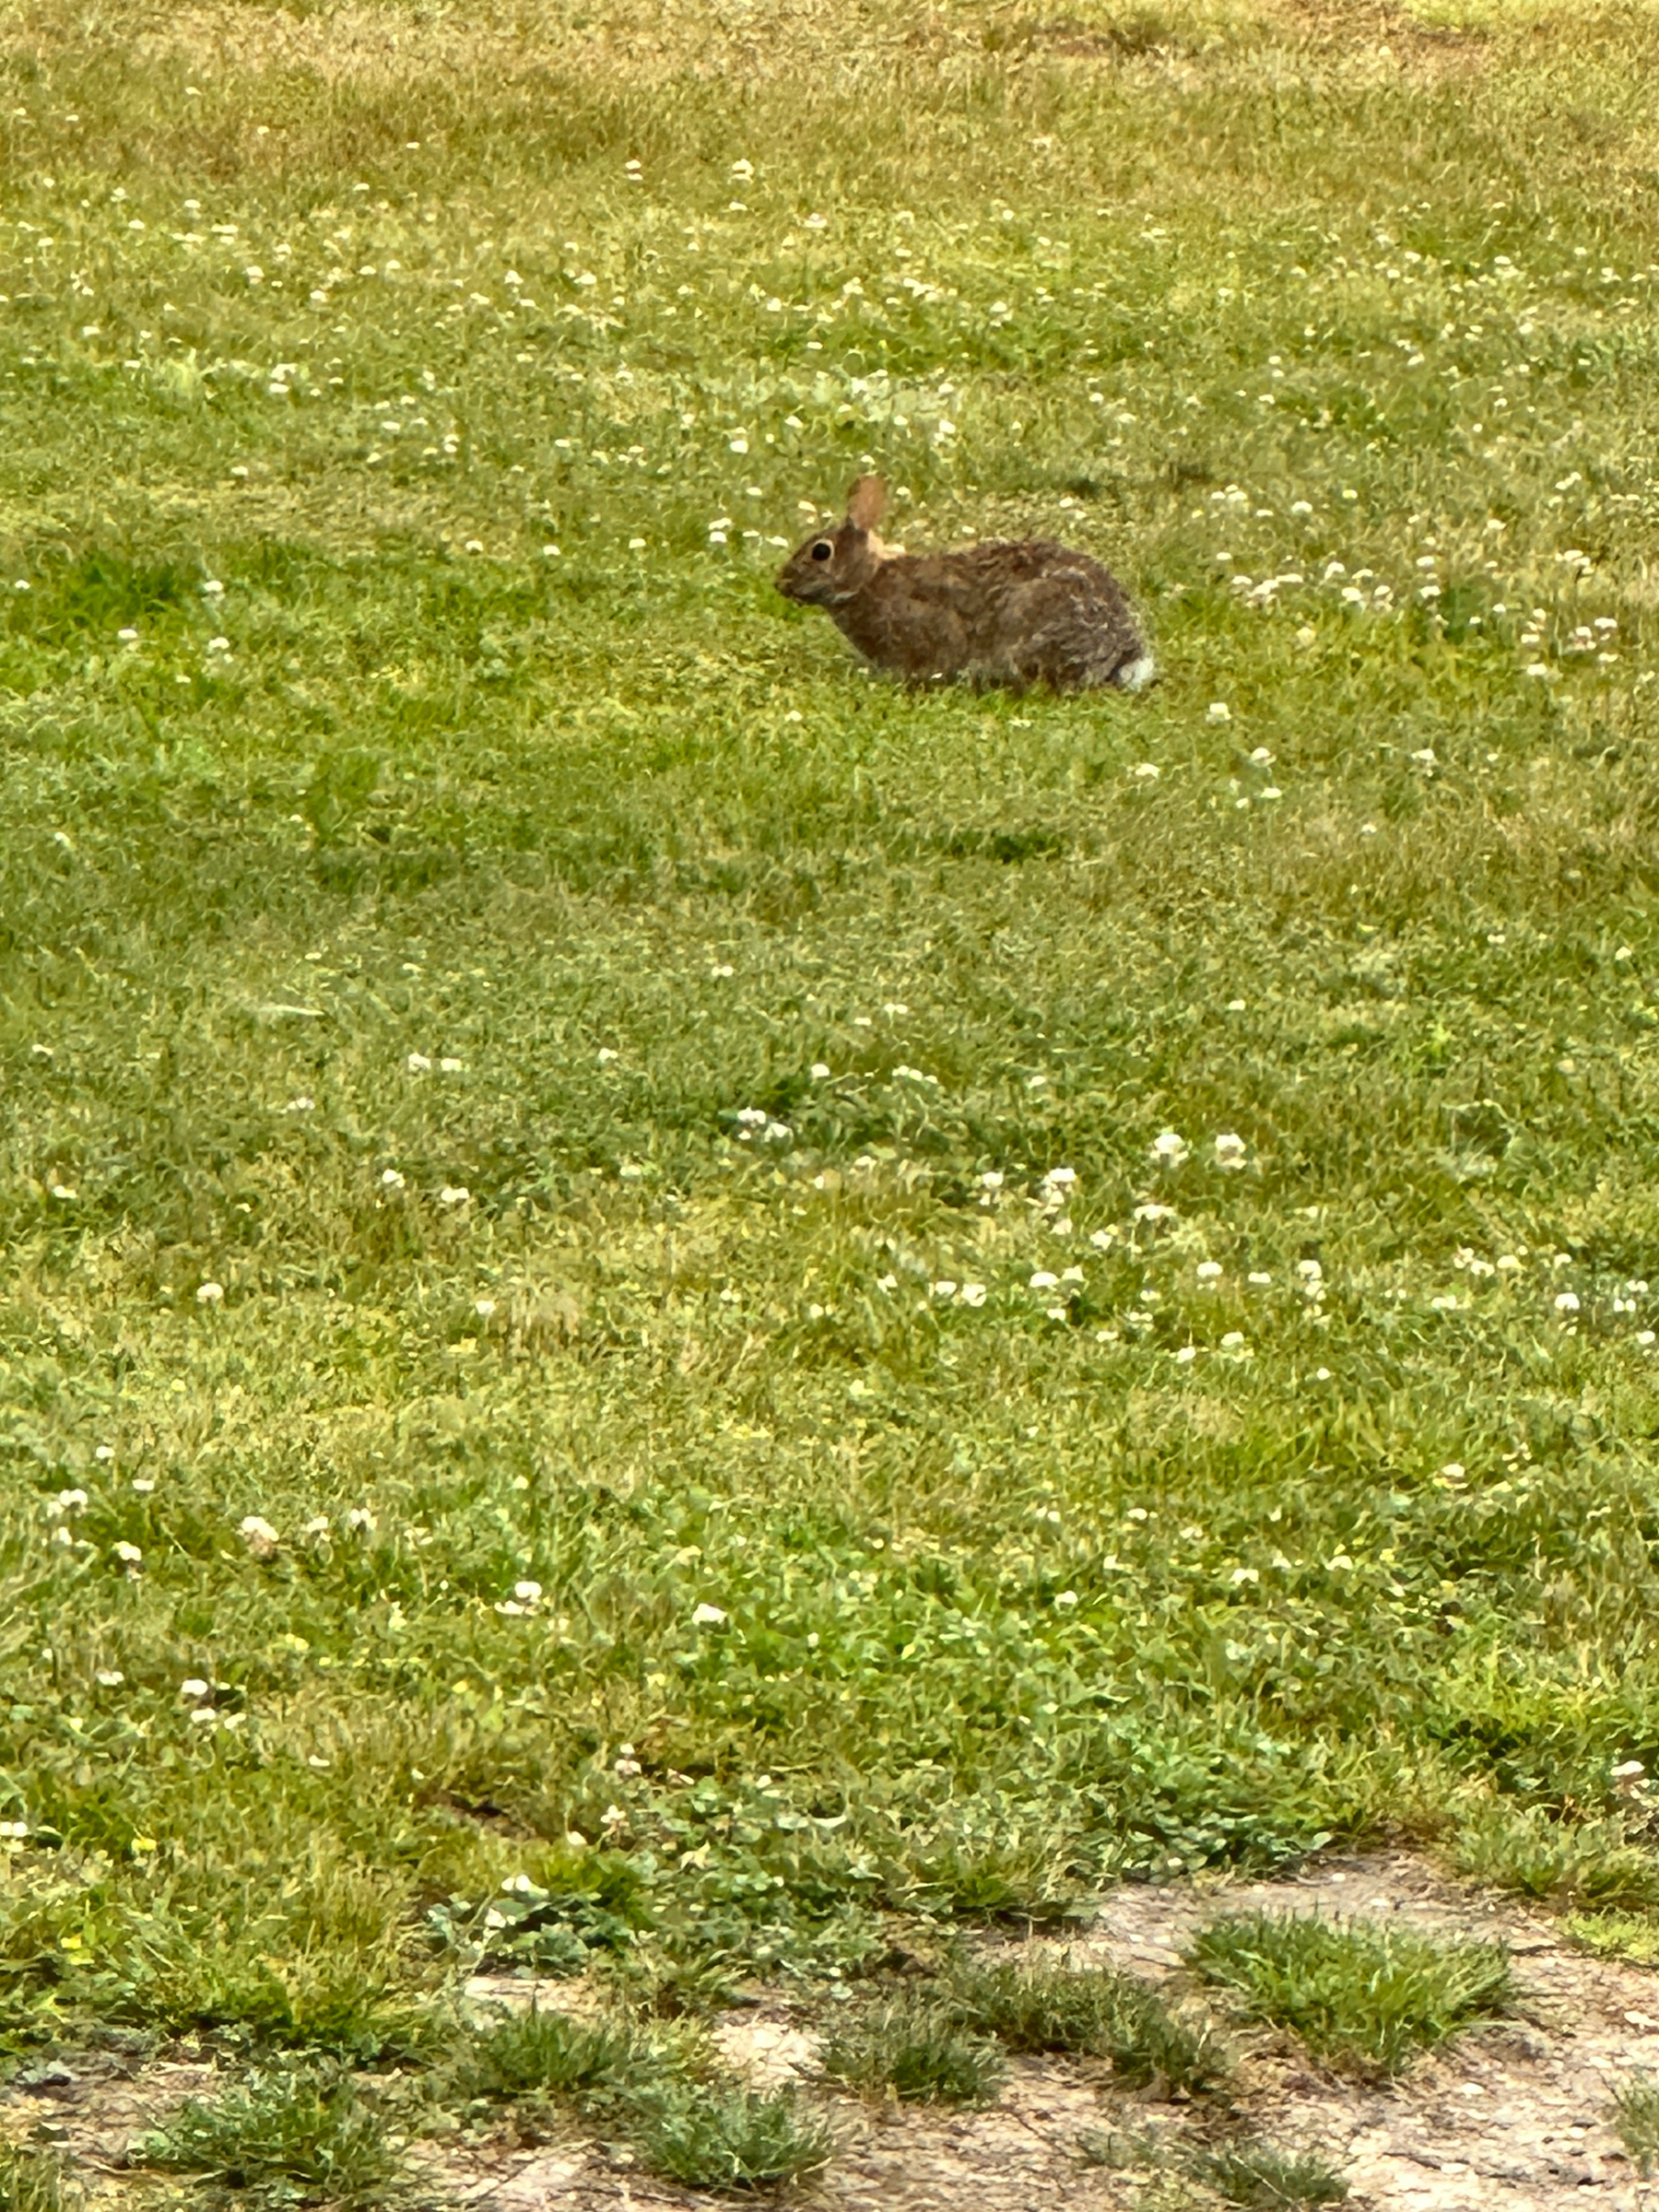 A rabbit in a large grassy field. It even has a white cottontail. 